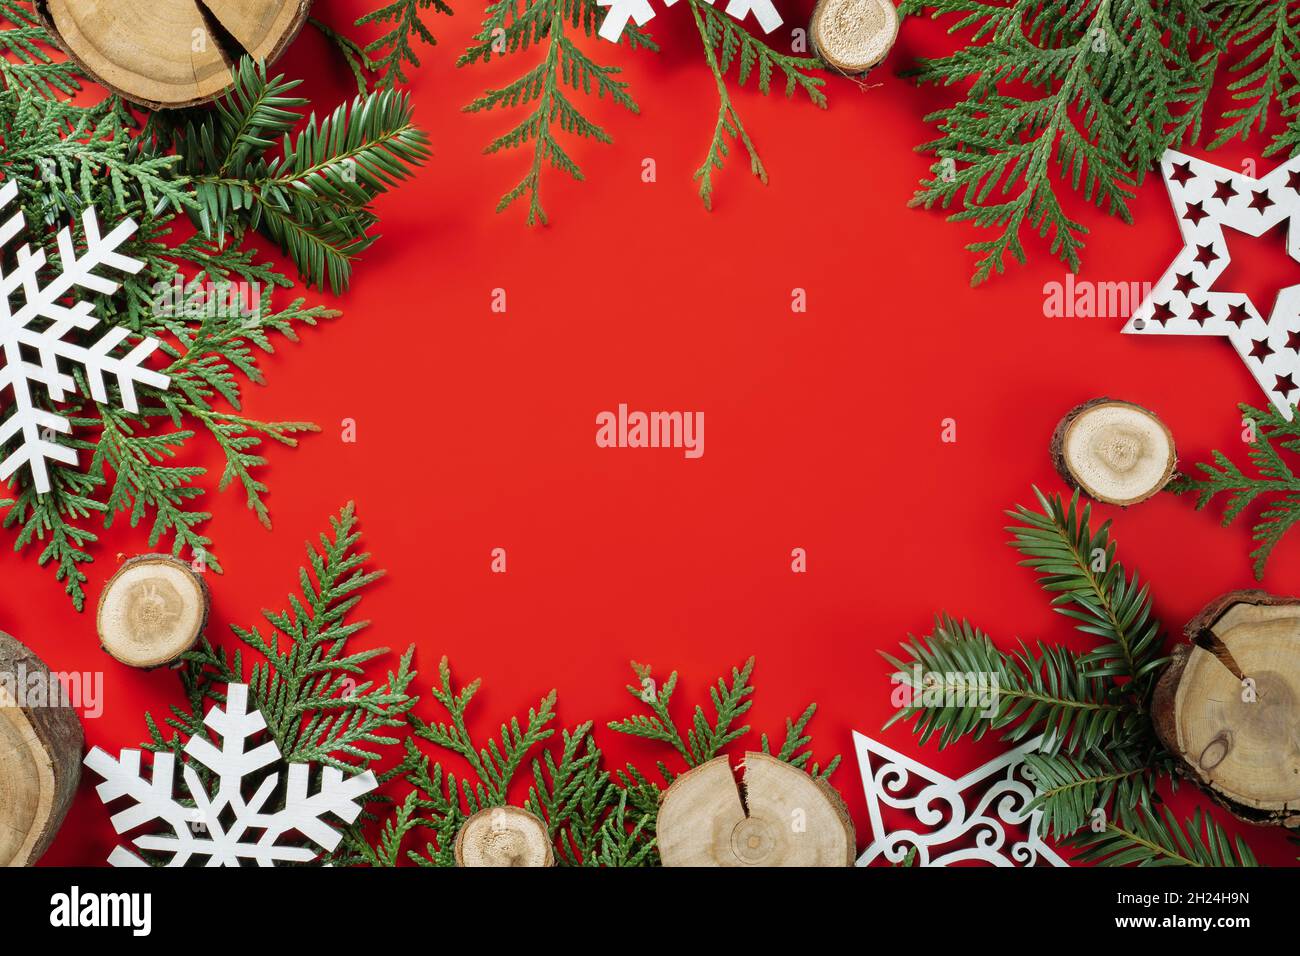 Wood cuts or branch slabs and wooden snowflakes with Christmas tree branches on red background. Christmas or New Year concept. Flat lay. Copy space Stock Photo